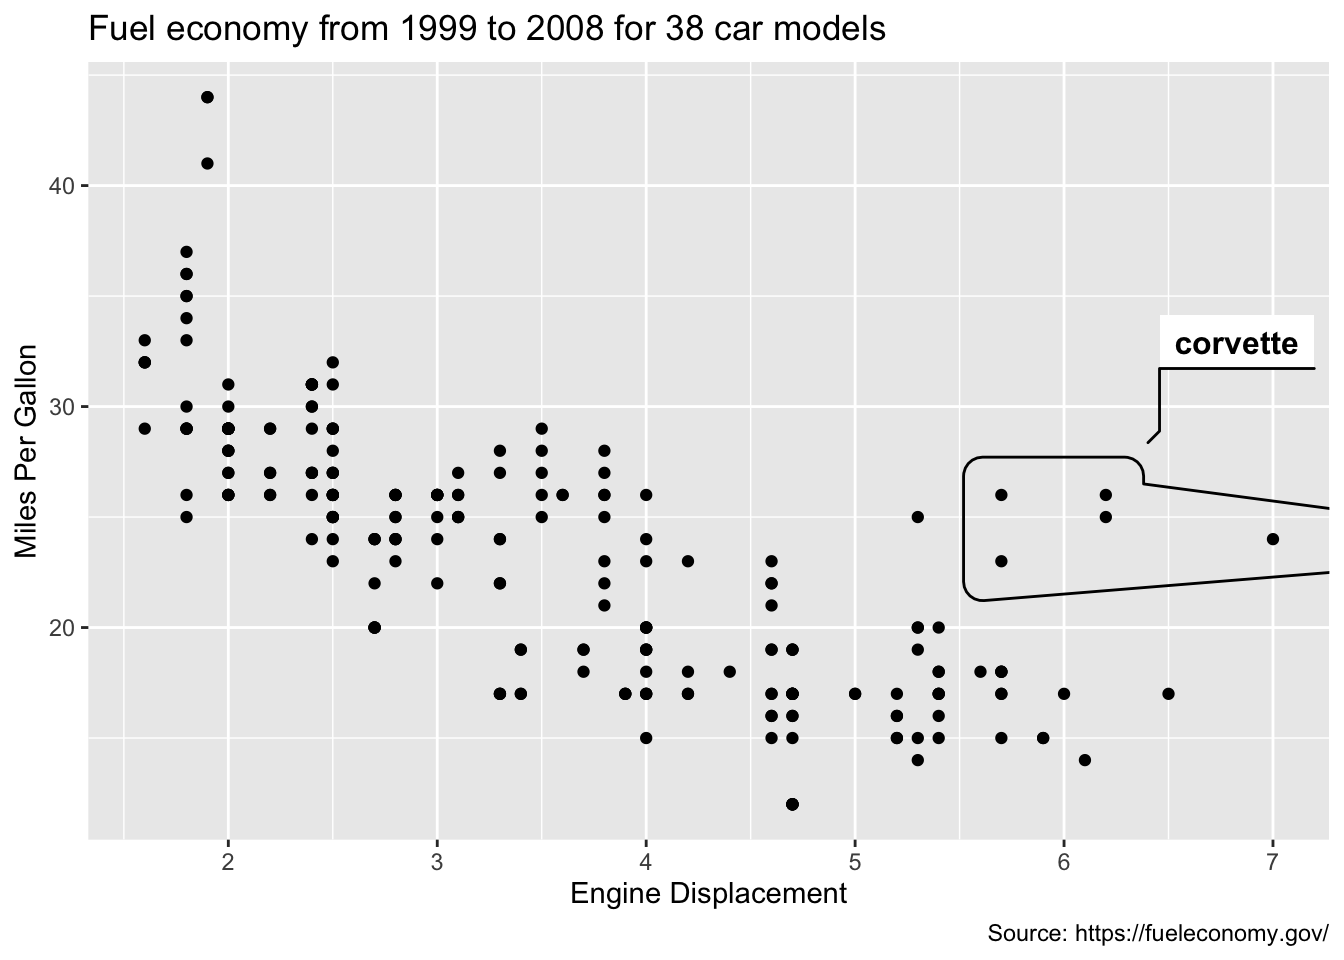 Using the ggforce package to annotate the corvette’s in this dataset.